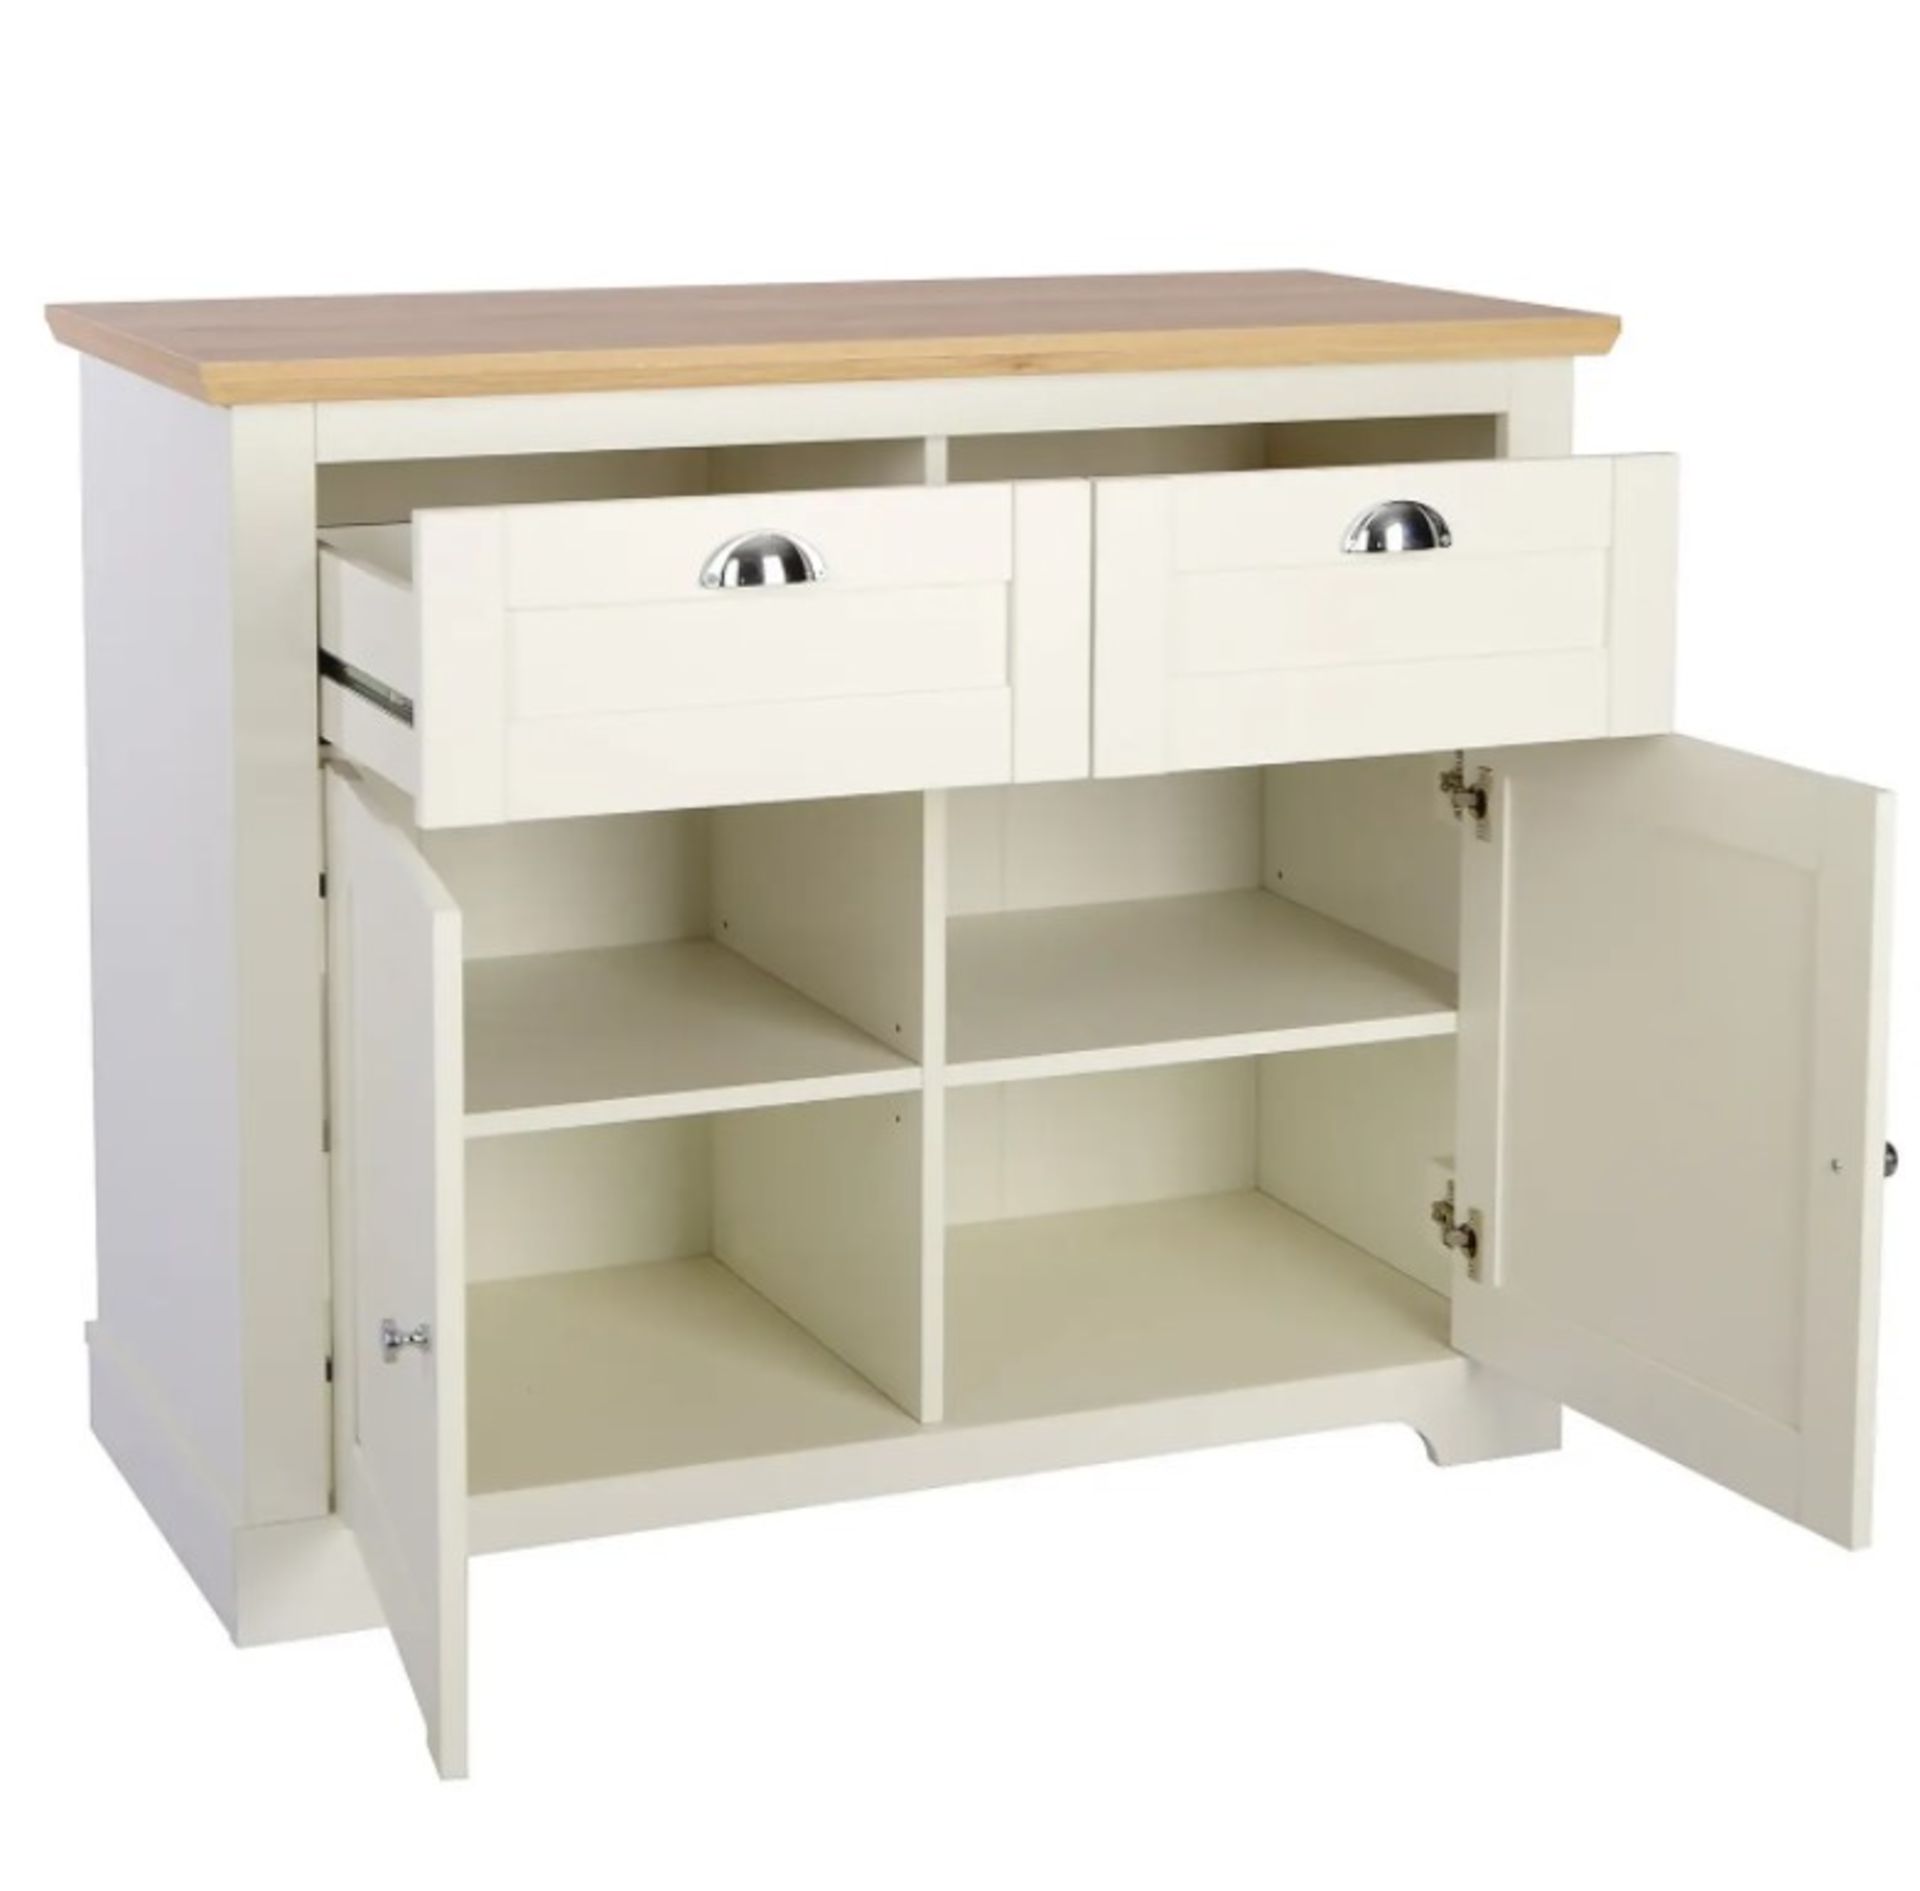 (Mz) 1x Diva Compact Sideboard Ivory RRP £180. (L100.5x W44.8x H83cm) - Image 2 of 3